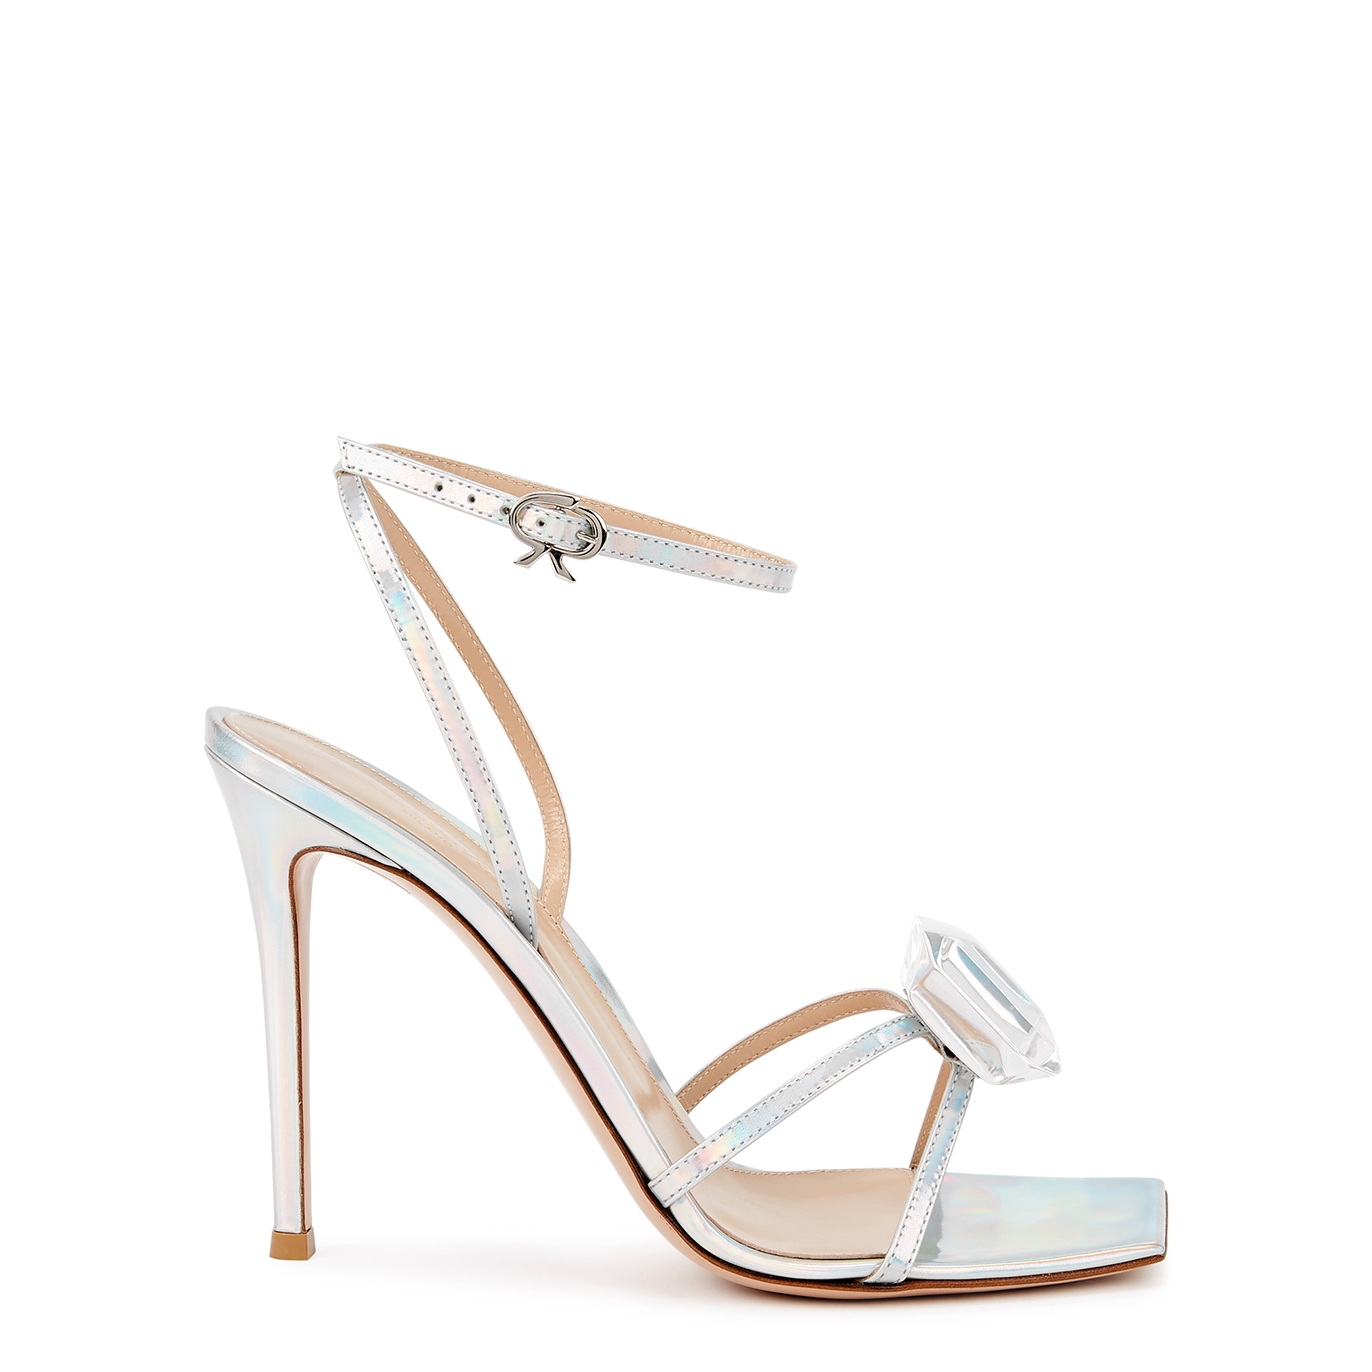 Gianvito Rossi Jaipur 110 Embellished Leather Sandals - Silver - 3